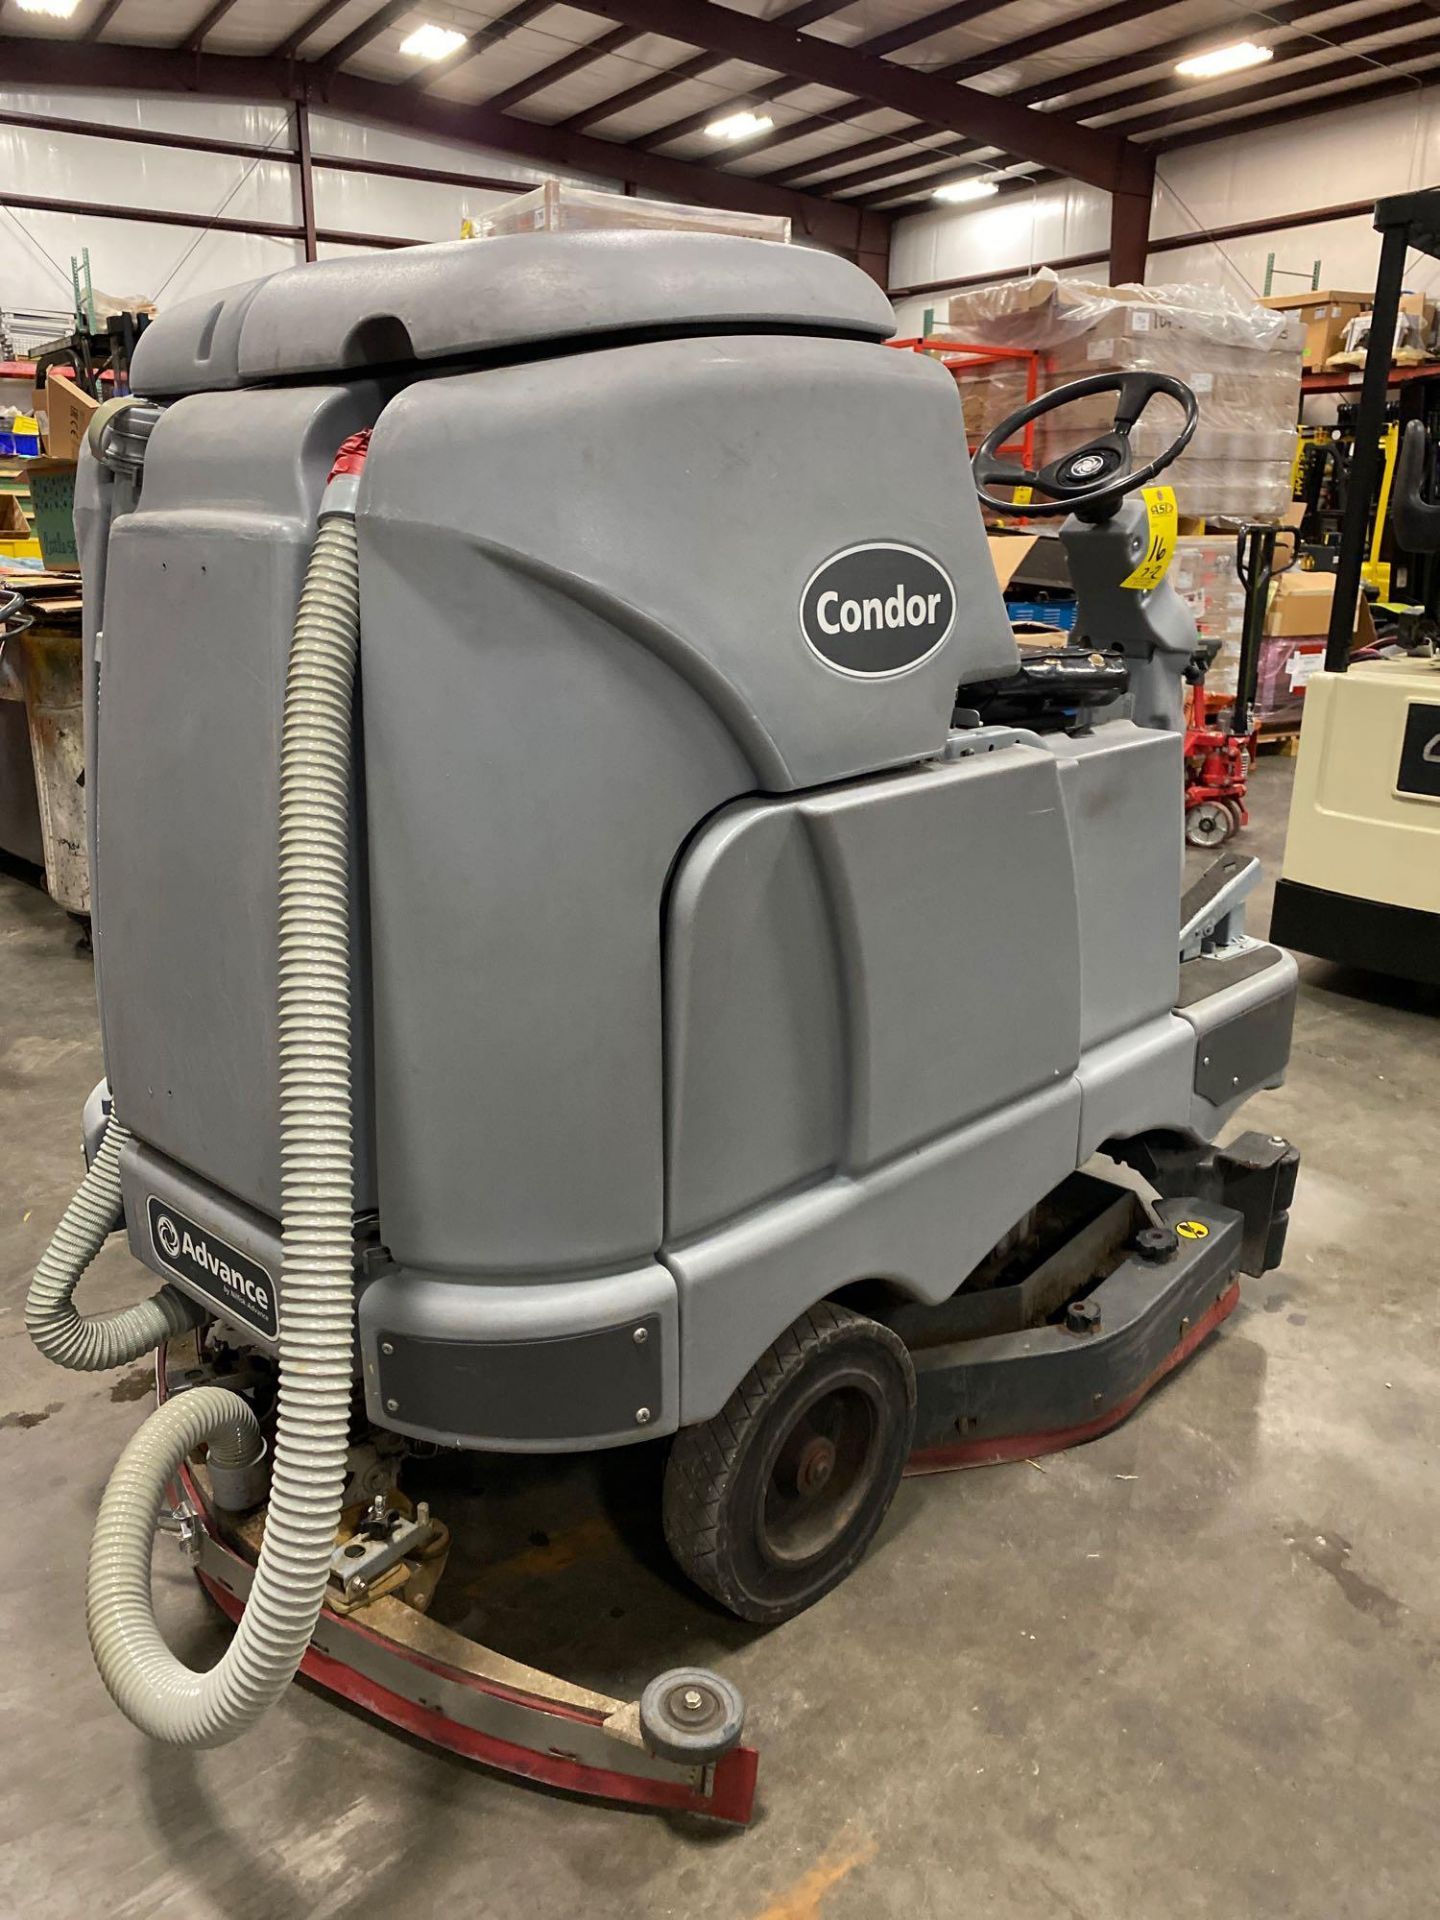 CONDOR 4030D ELECTRIC FLOOR SCRUBBER, 1,568 HOURS, RUNS AND OPERATES, 36V - Image 2 of 8